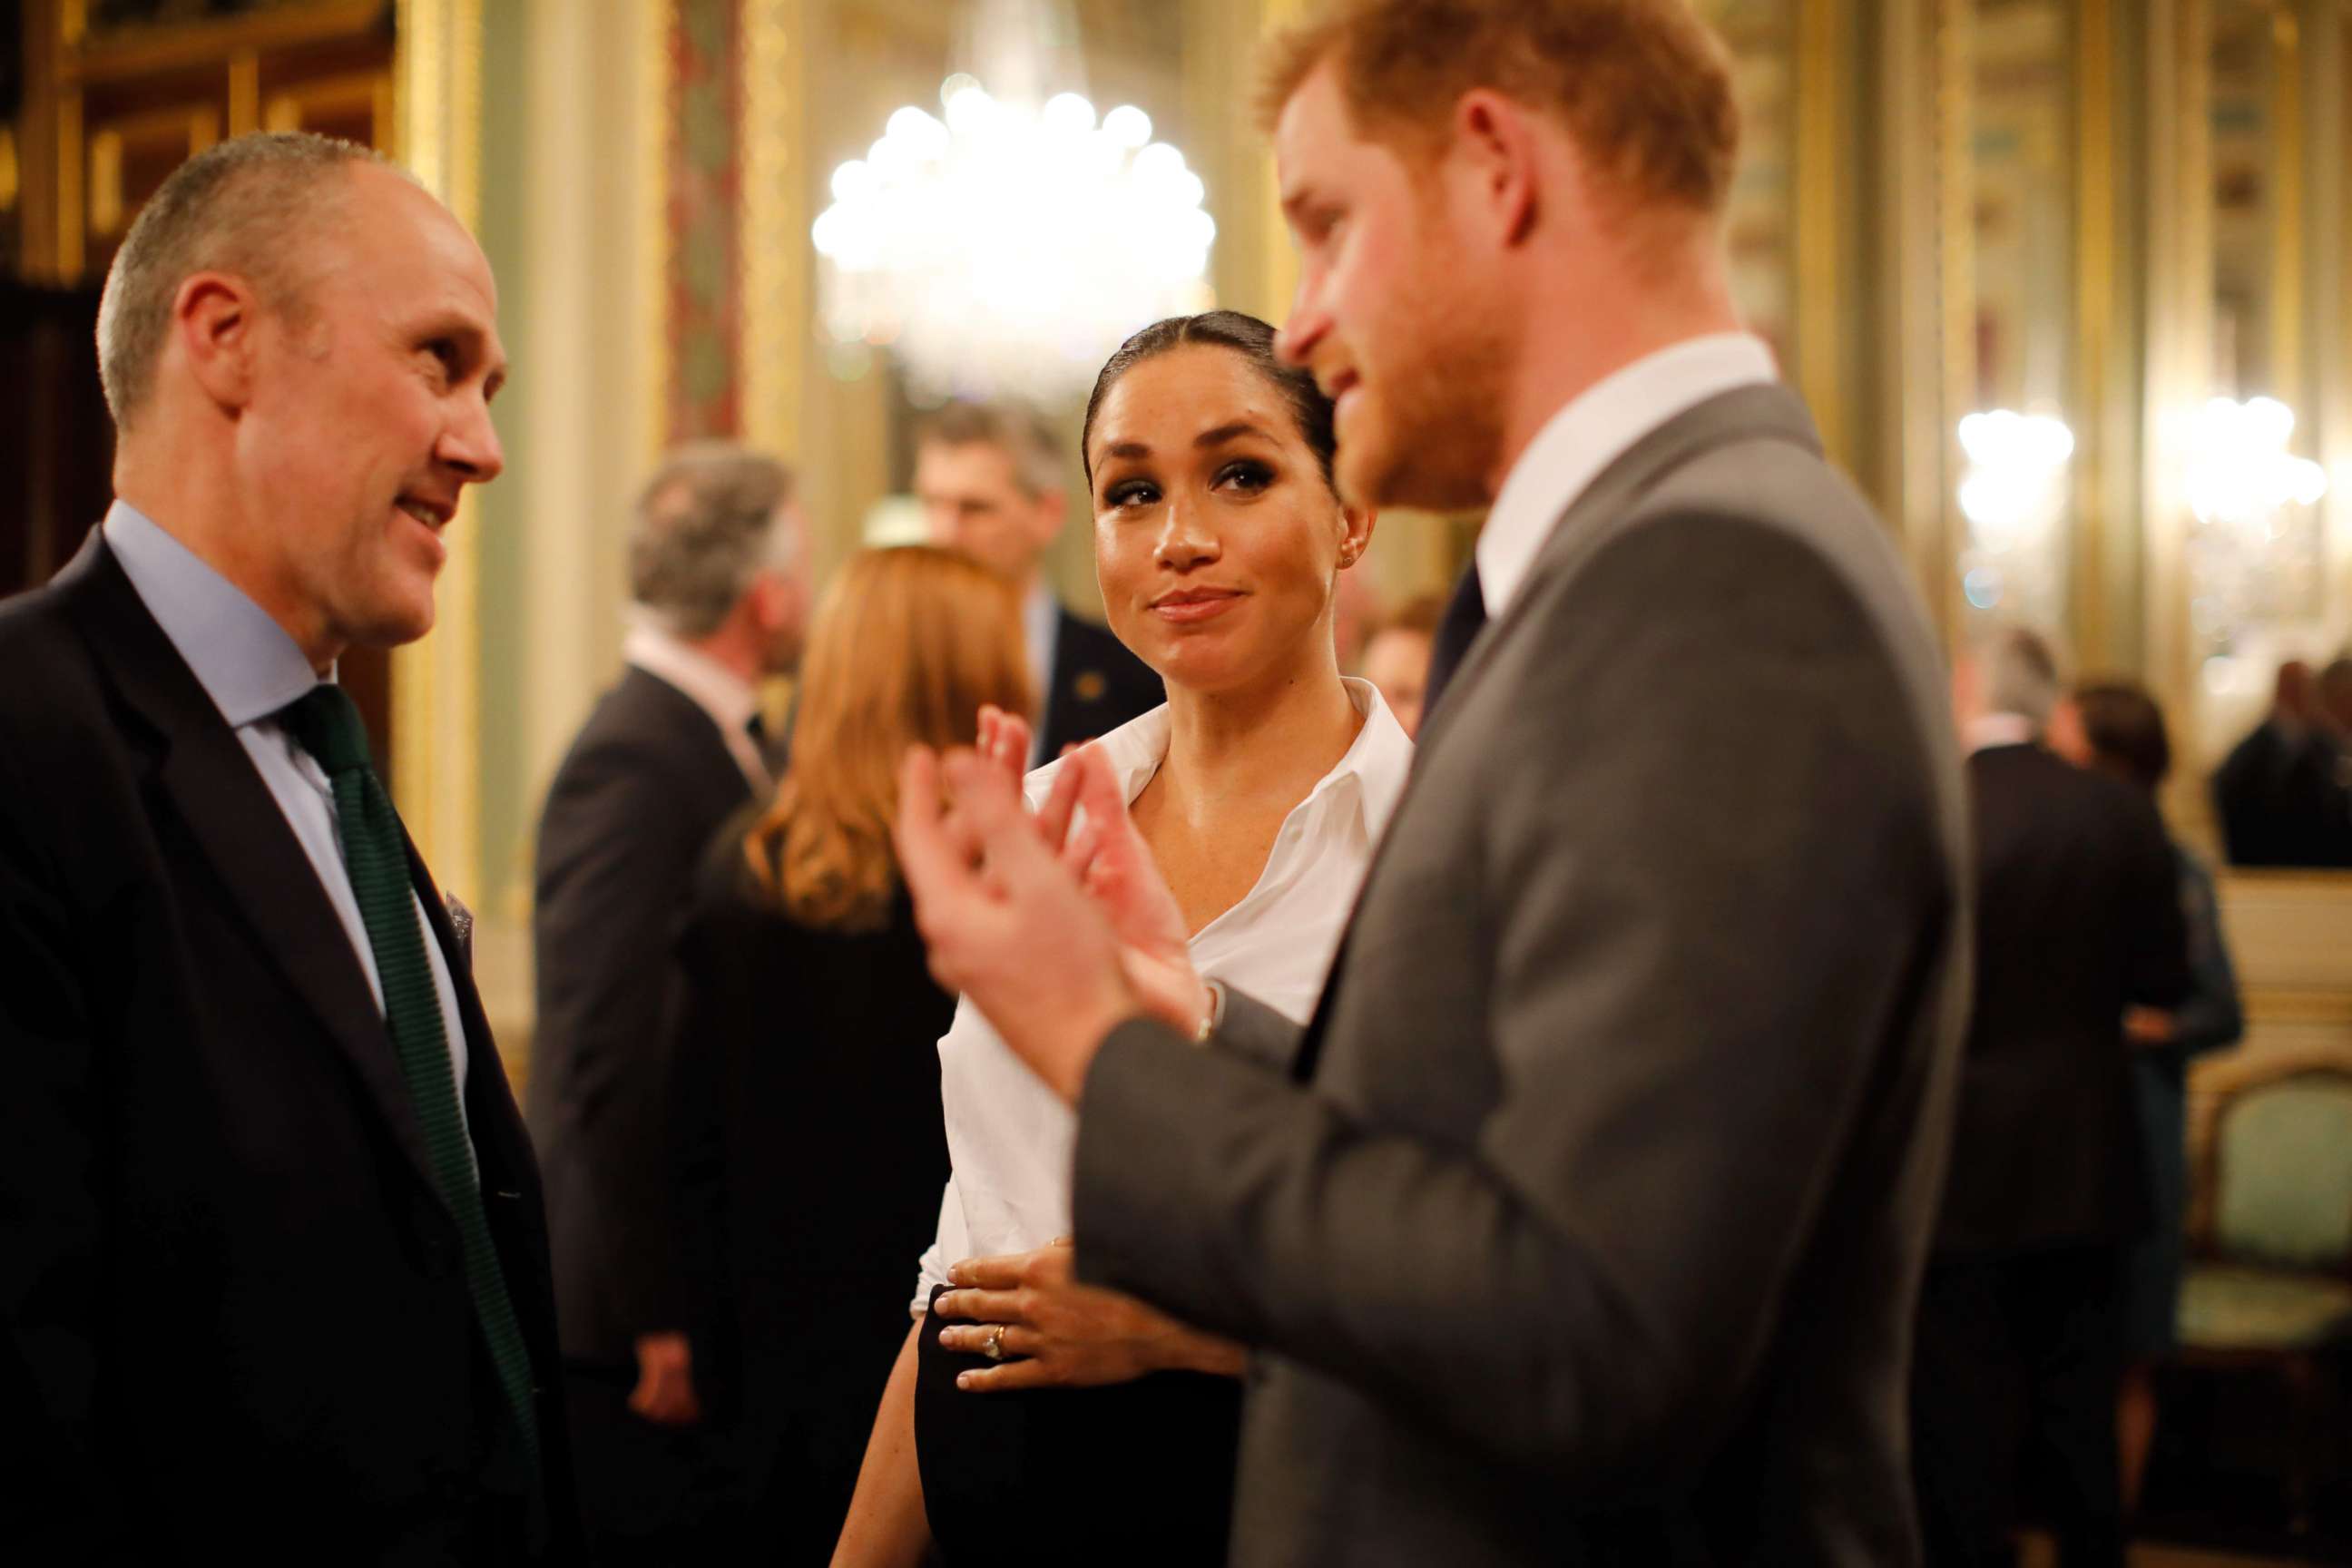 PHOTO: Britain's Prince Harry, Duke of Sussex and Meghan, Duchess of Sussex meet guests at a reception as they attend the annual Endeavour Fund Awards at Drapers Hall in London on Feb. 7, 2019.